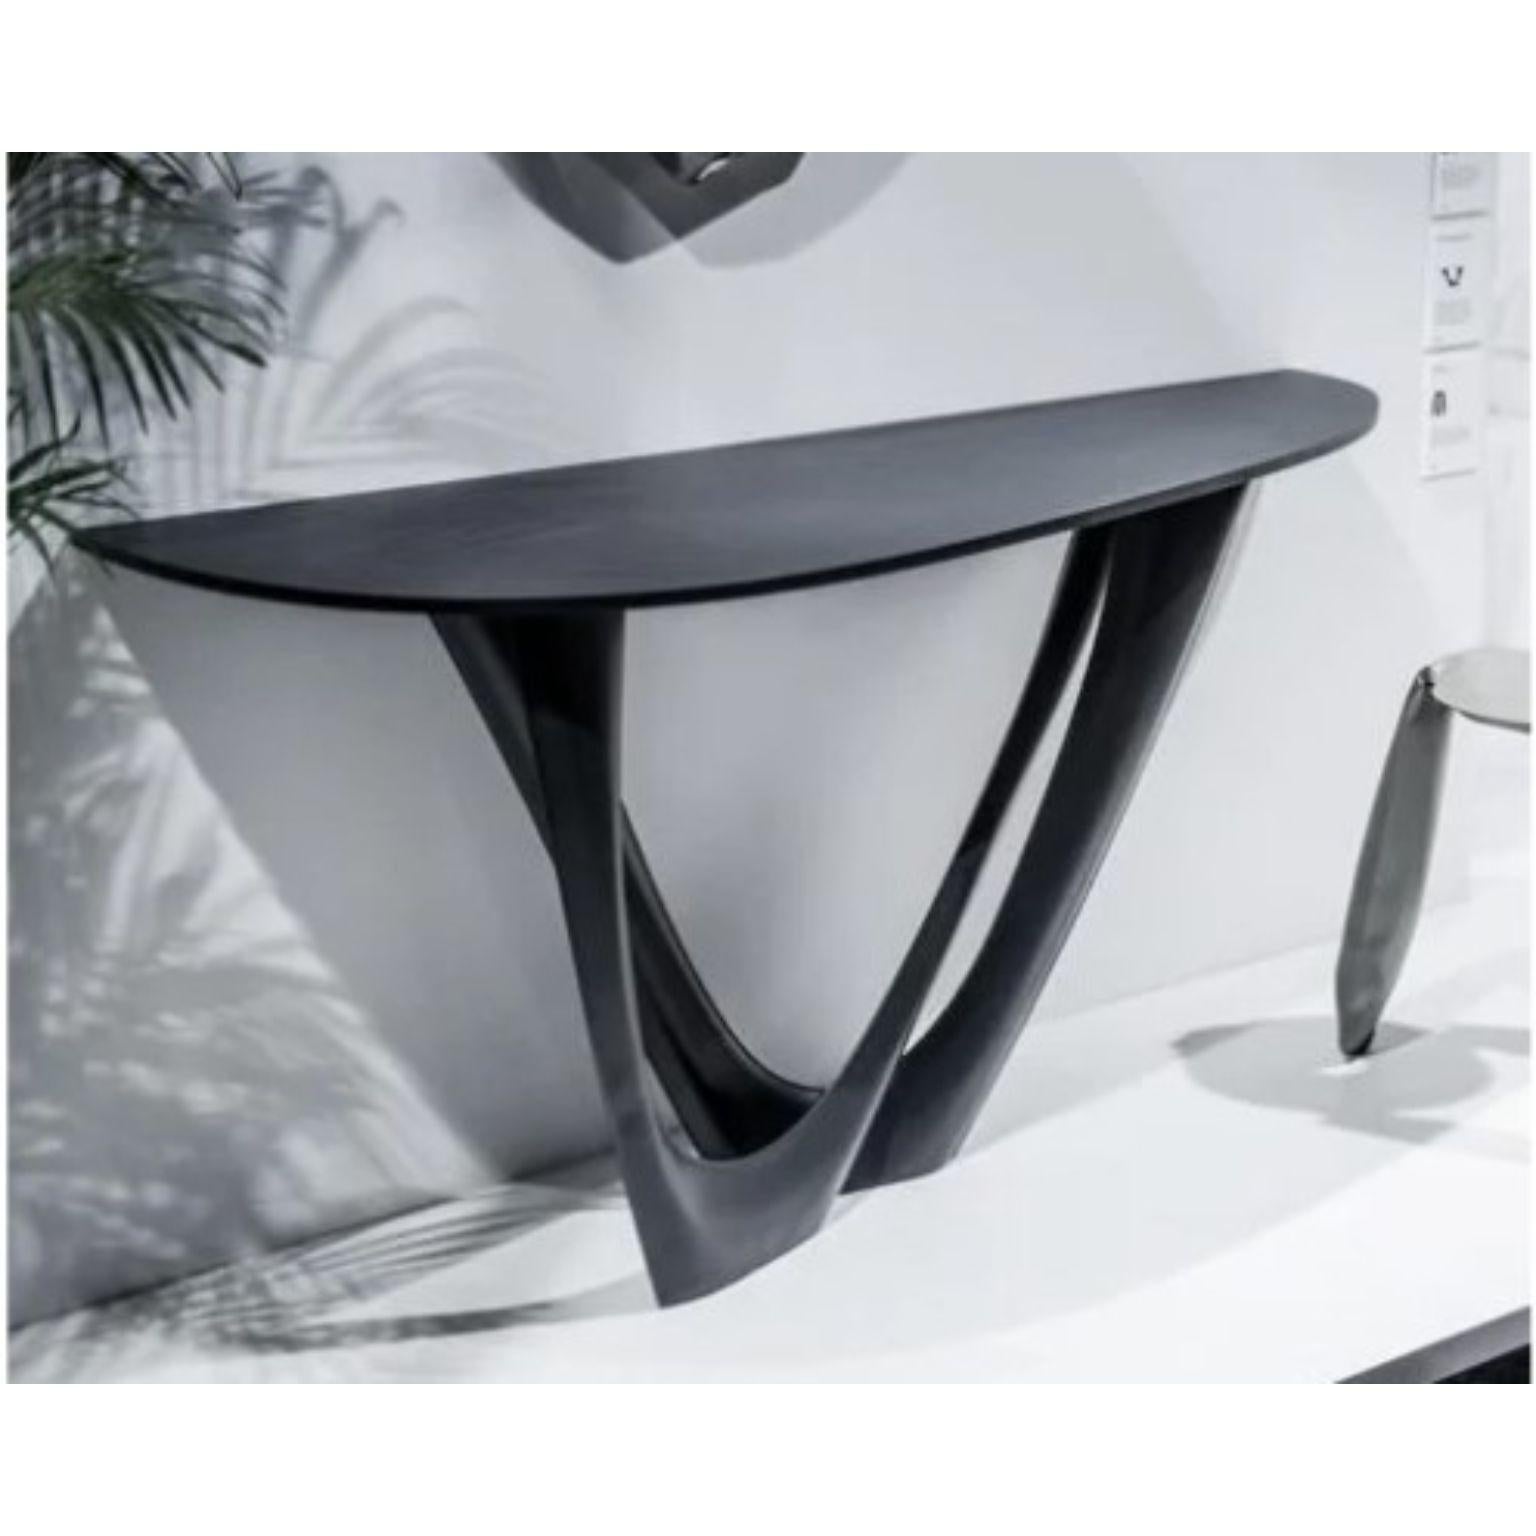 Powder-Coated Tele Grey G-Console Duo Concrete Top and Steel Base by Zieta For Sale